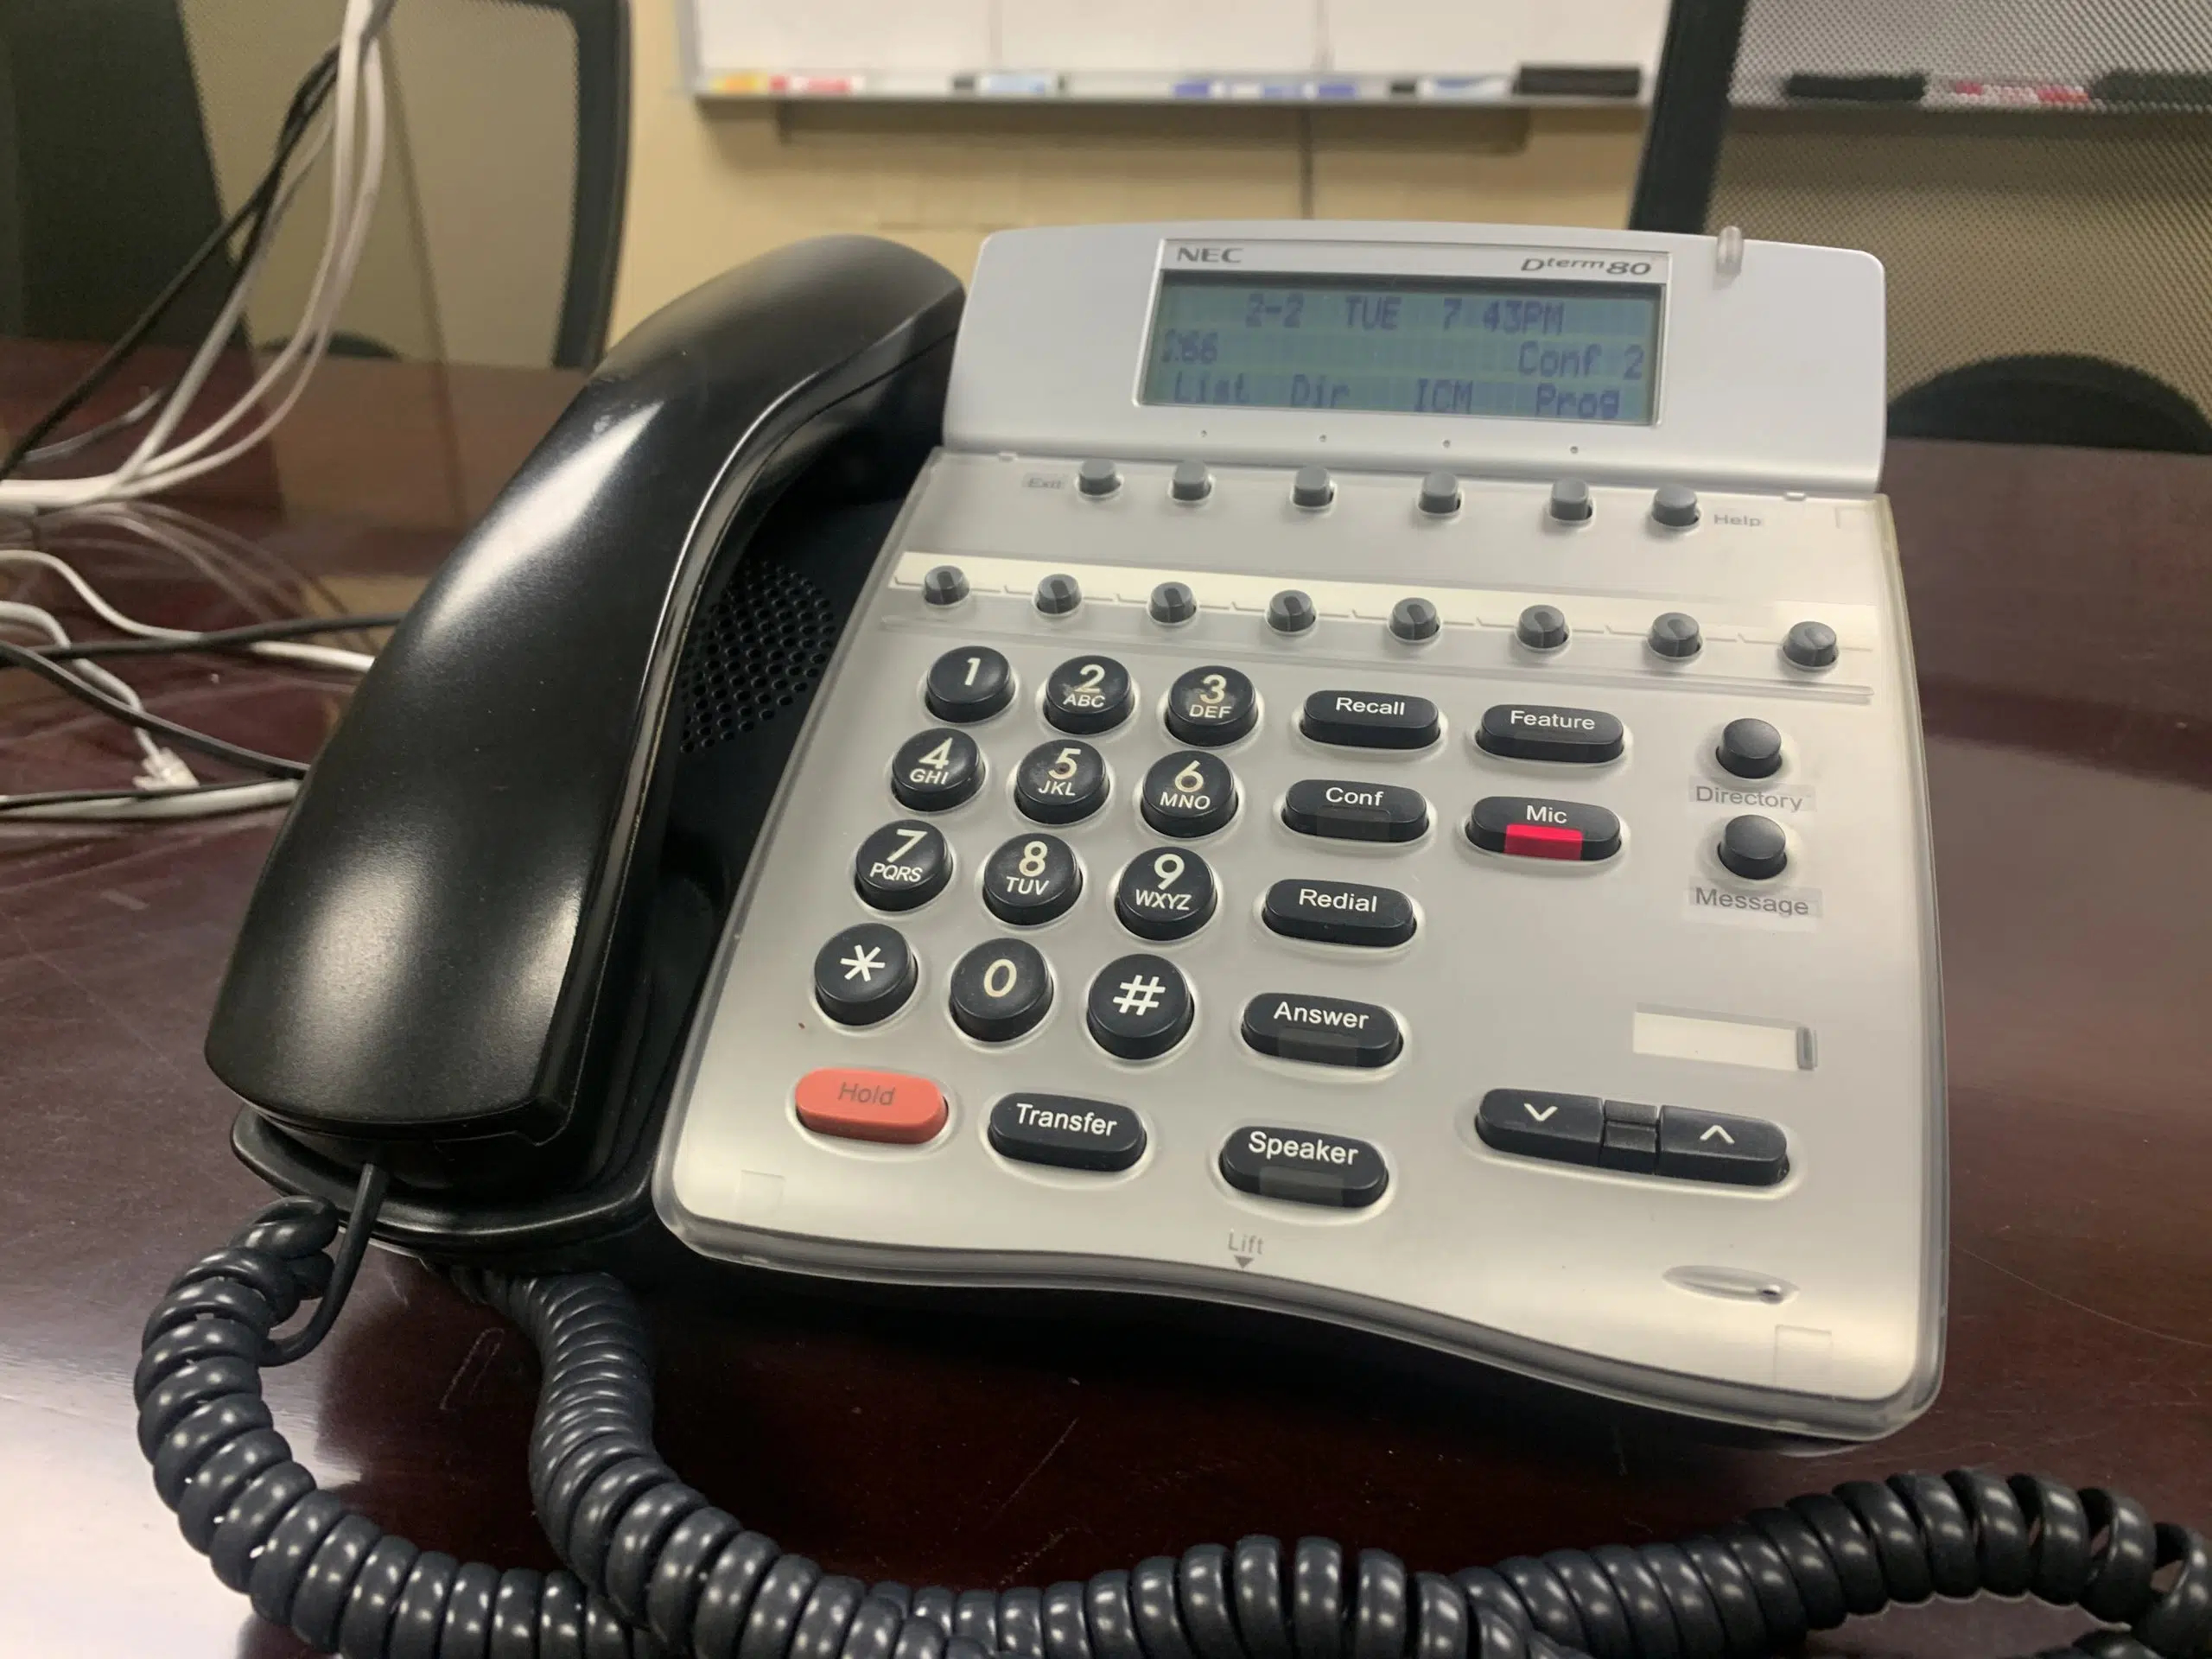 “217” Calls Must Include Area Code Starting February 27th Vermilion County First 1782